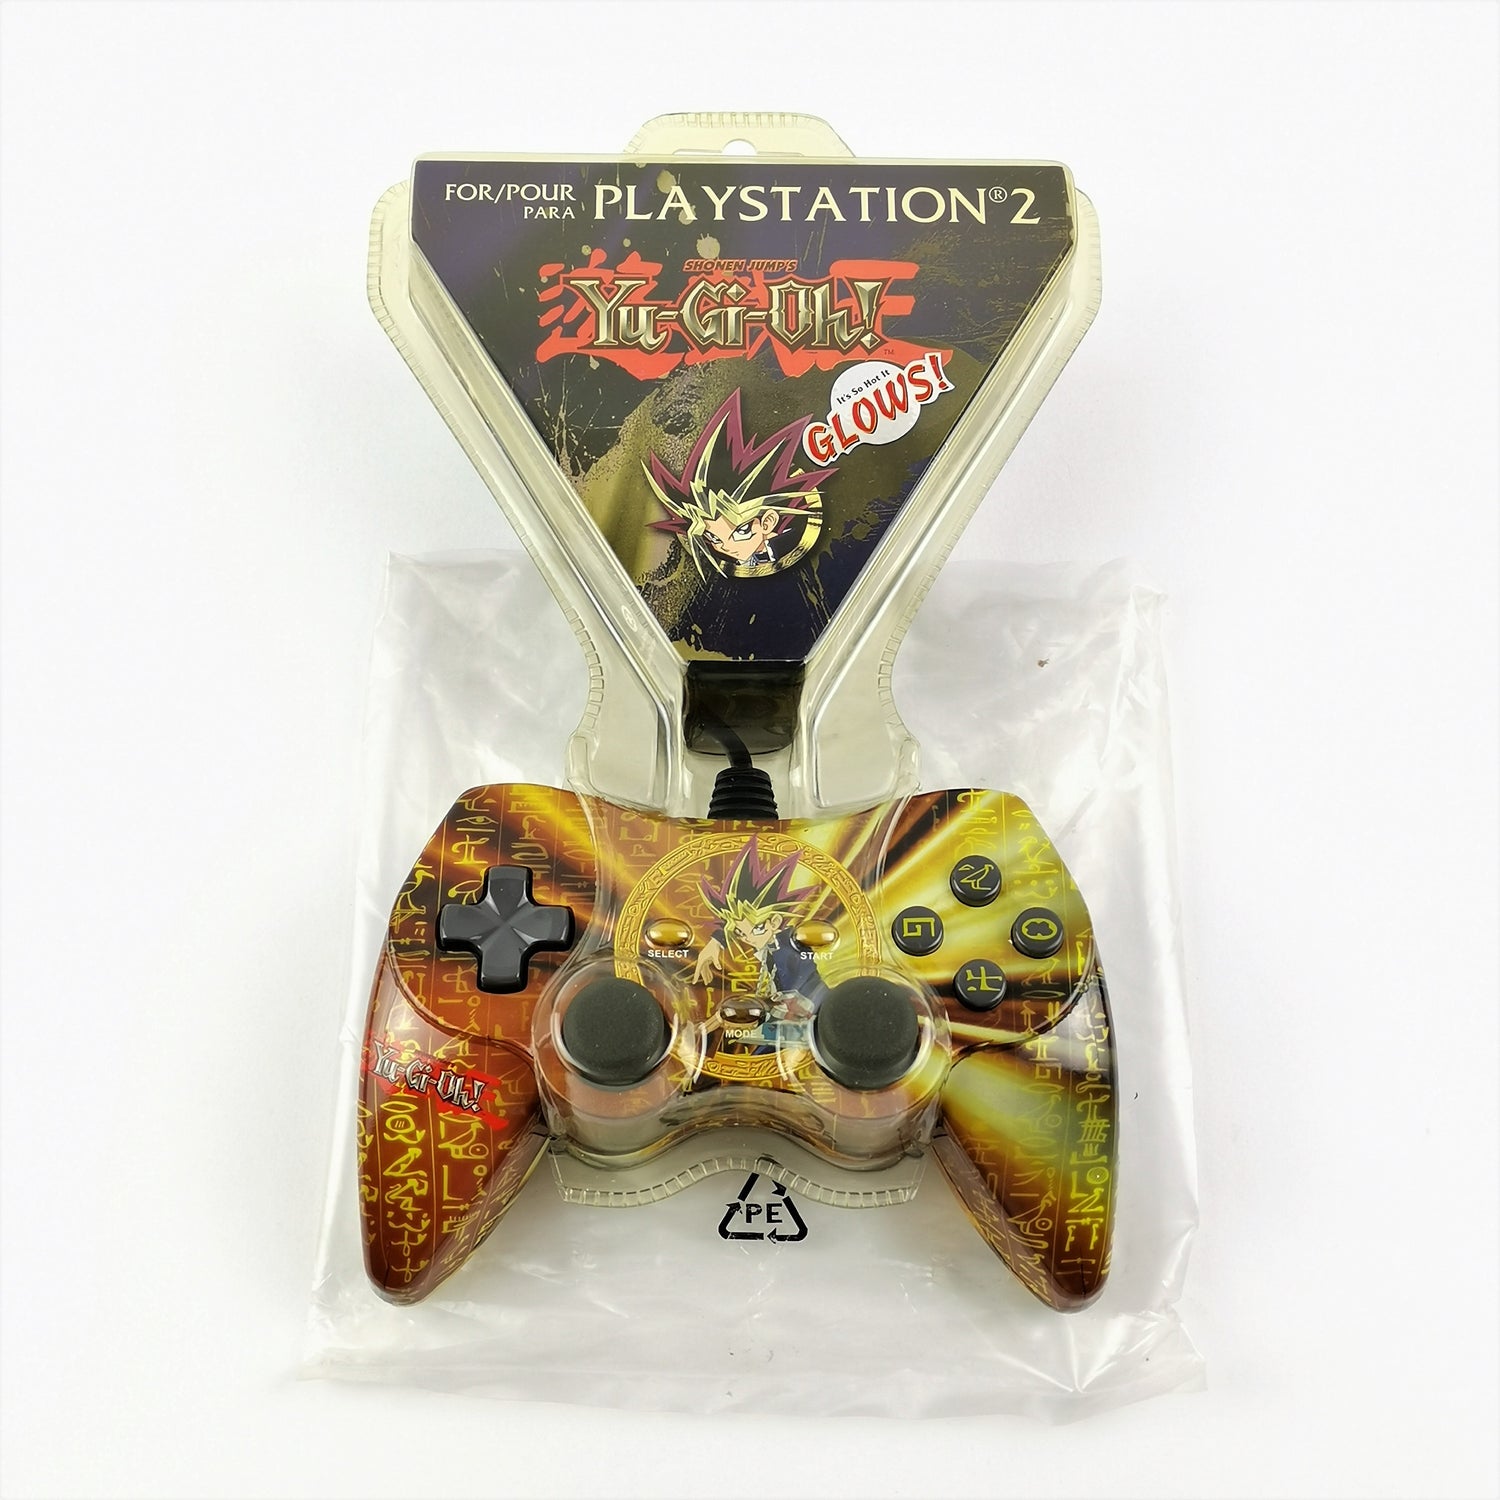 Sony Playstation 2 Accessories: Yu-Gi-Oh Controller Gamepad - NEW Blister OVP PS2